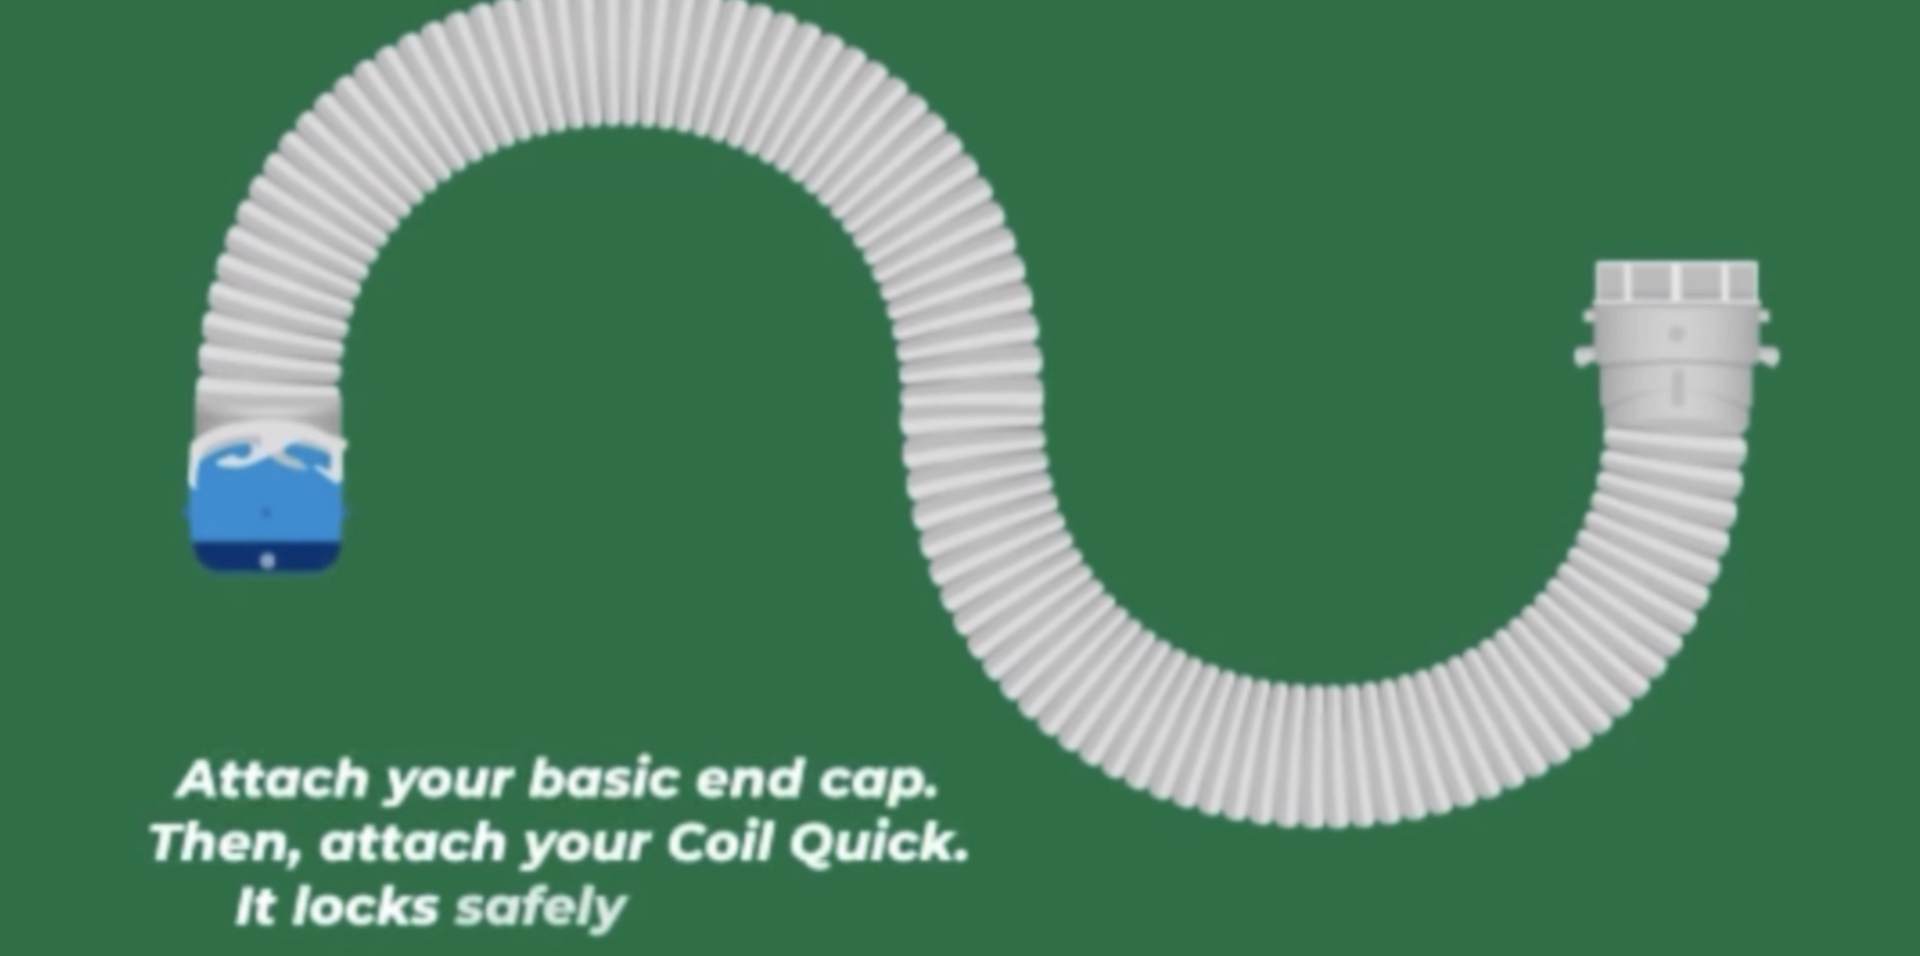 Load video: Watch the video to see how the Coil Quick works